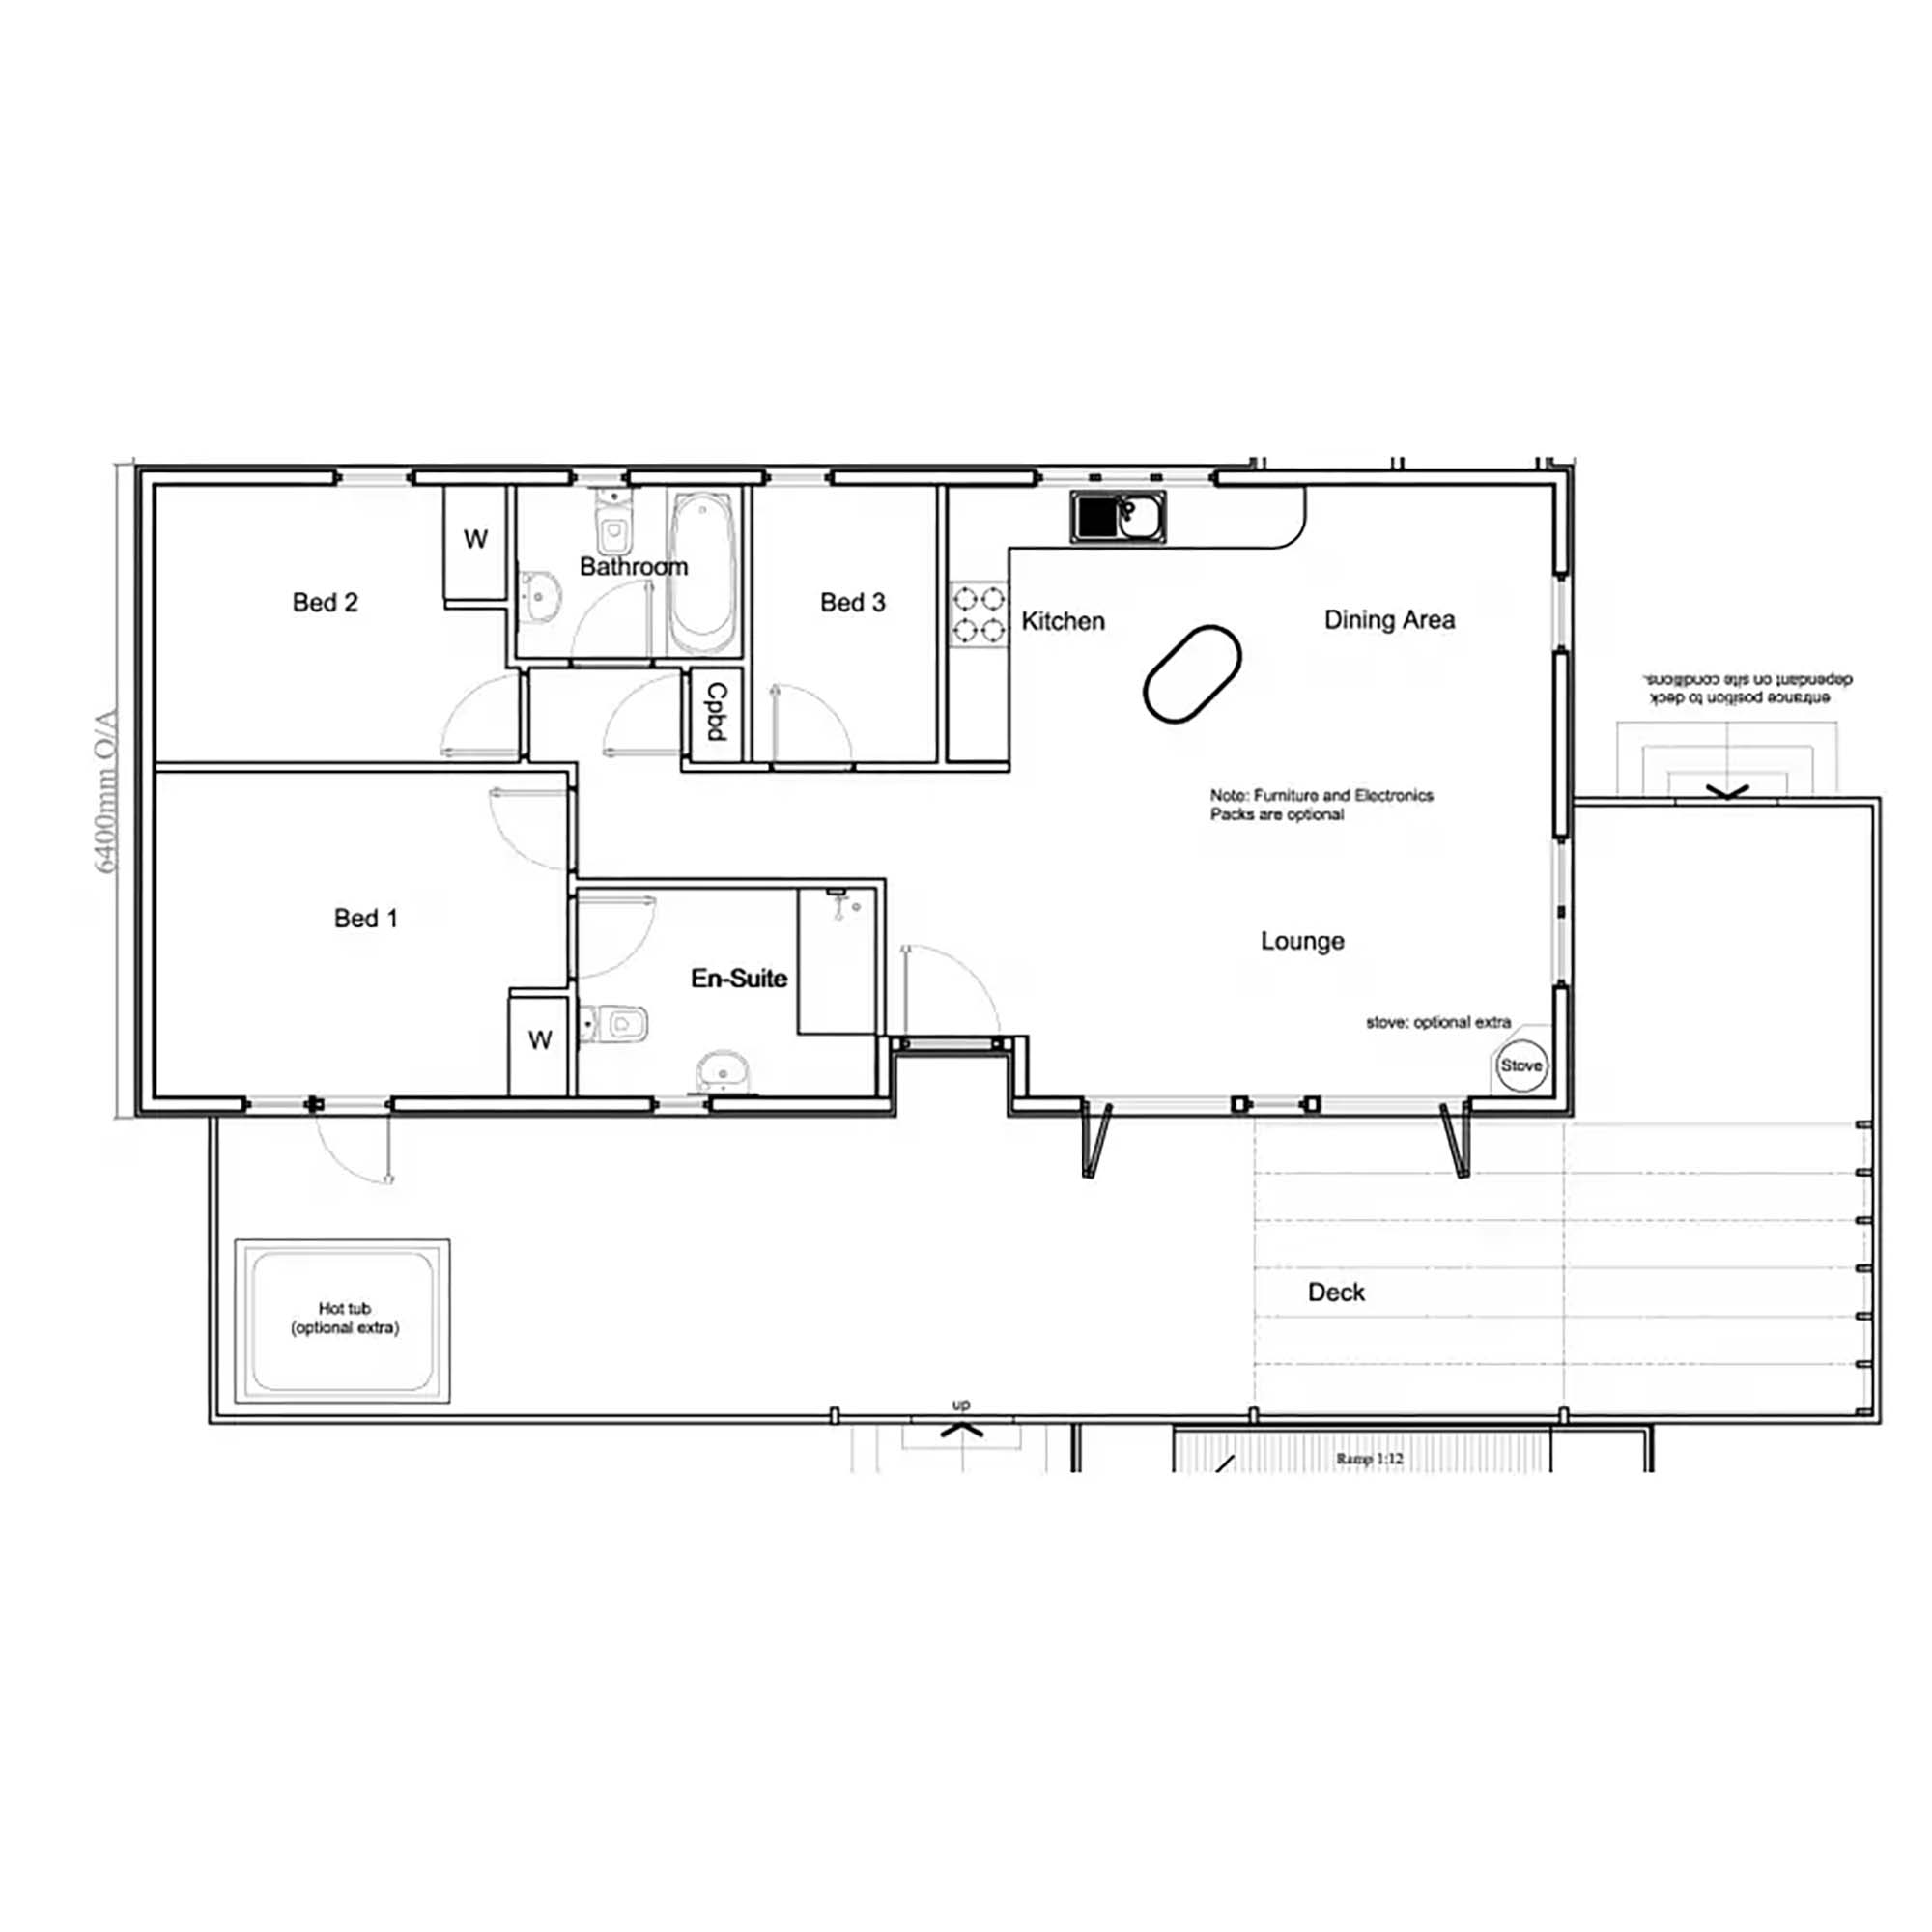 Signature Lodge Assisted Living floor plan